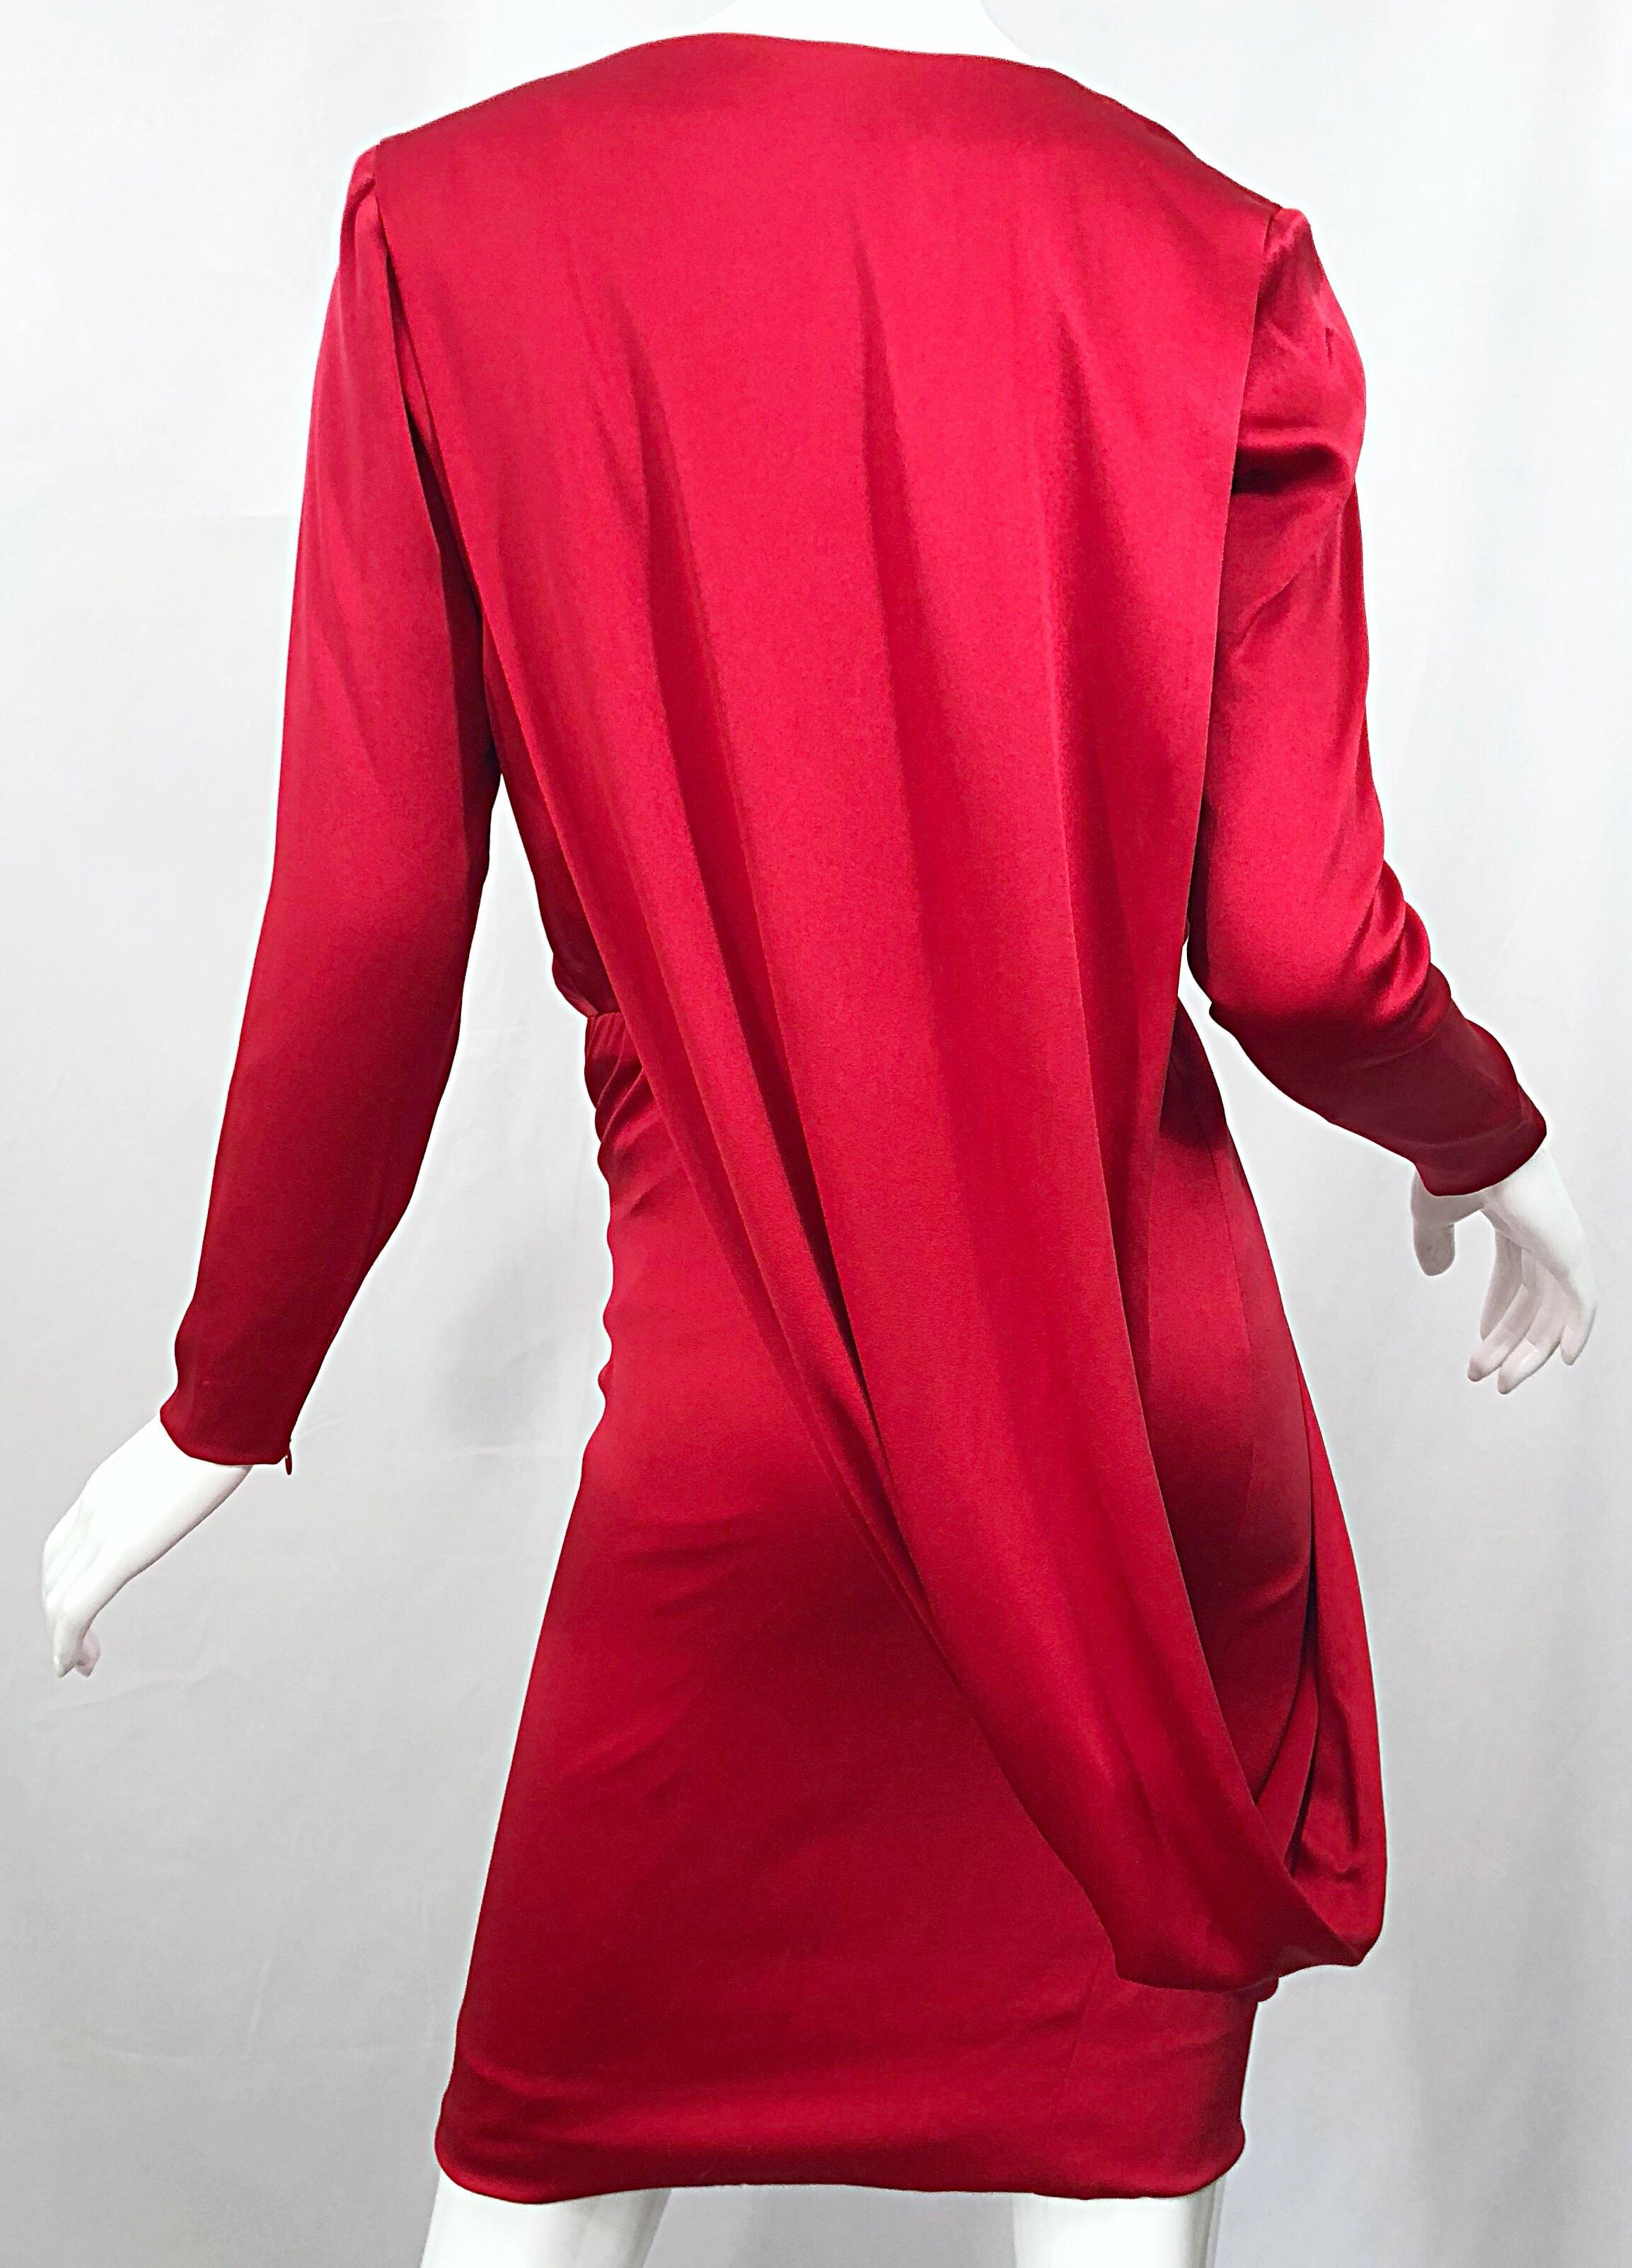 Vintage Givenchy Couture by Alexander McQueen Sz 36 Lipstick Red Silk Cape Dress For Sale 2